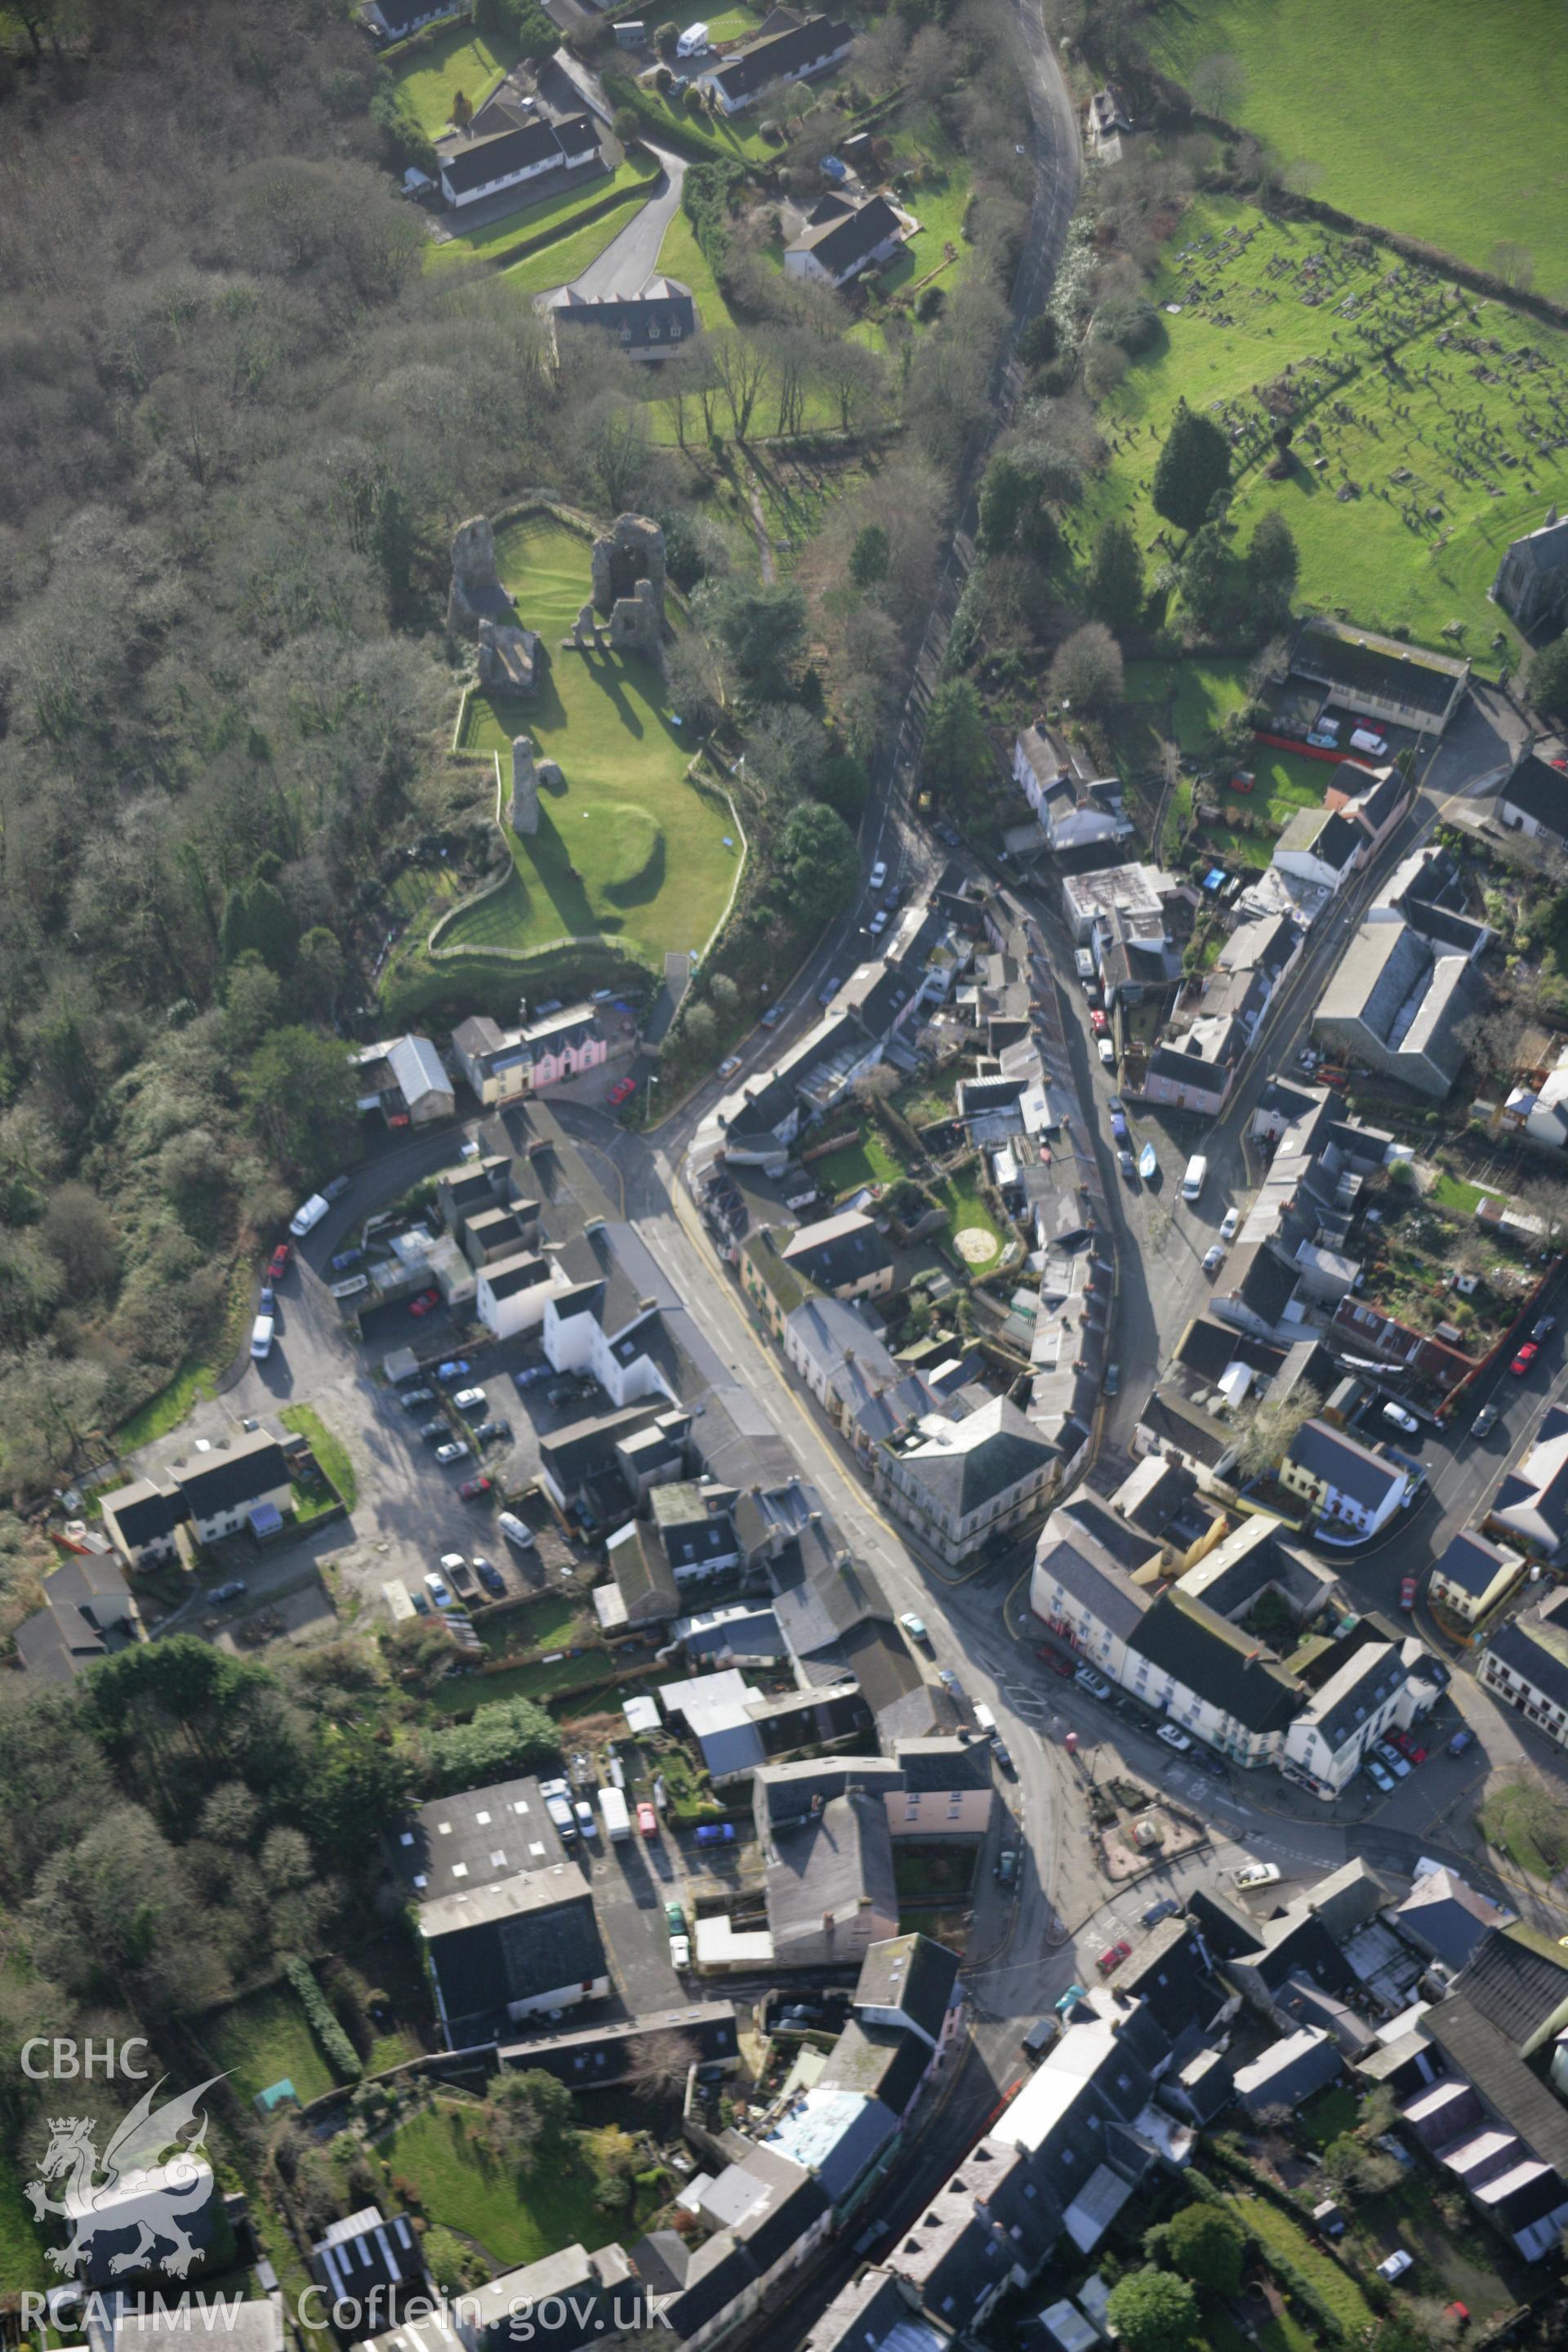 RCAHMW colour oblique aerial photograph of Narberth town, in general view from the north. Taken on 11 January 2006 by Toby Driver.